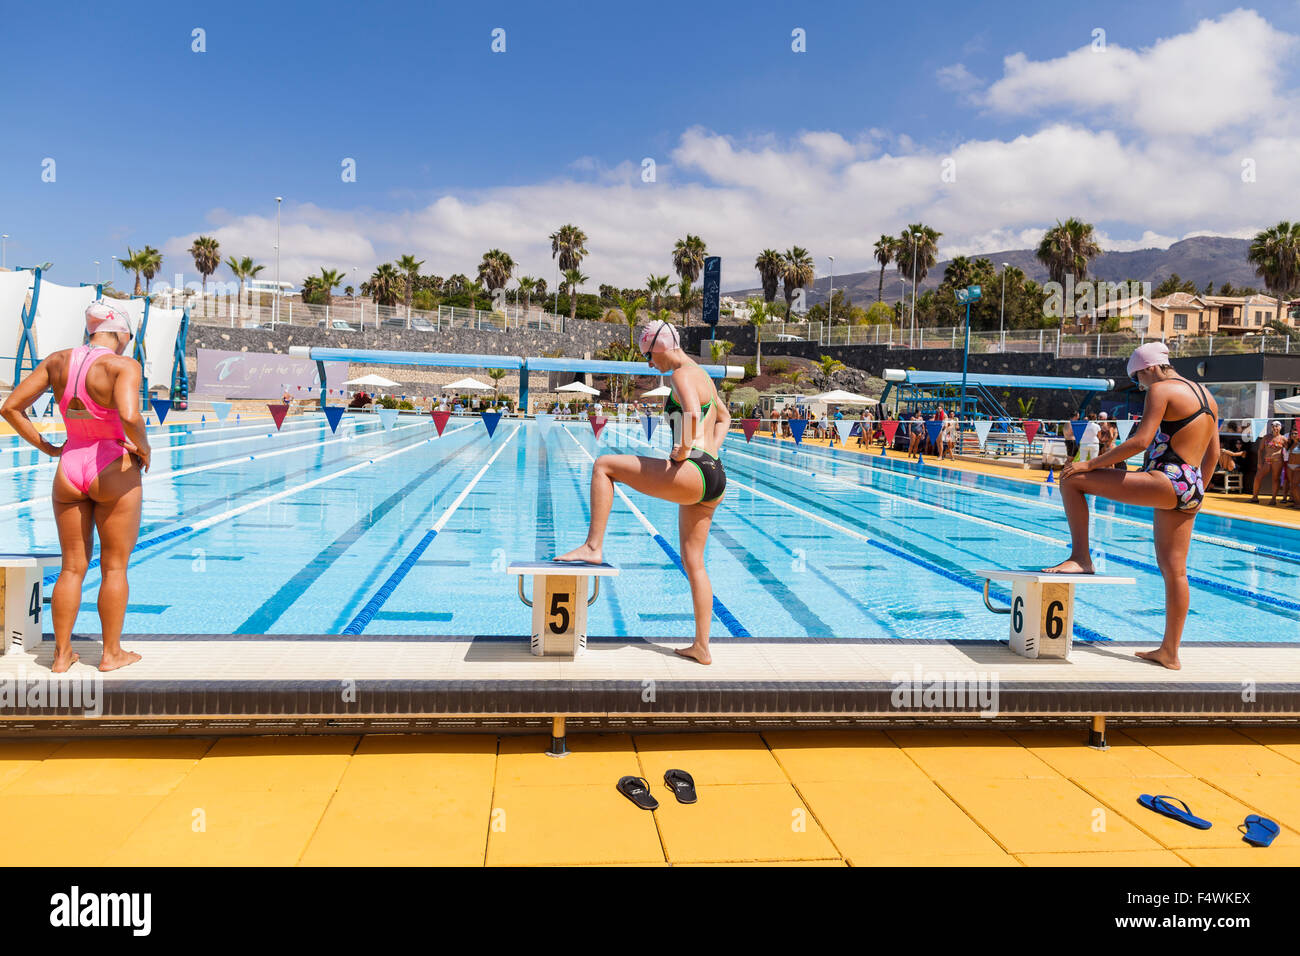 Swimmers preparing to start a race. Stock Photo